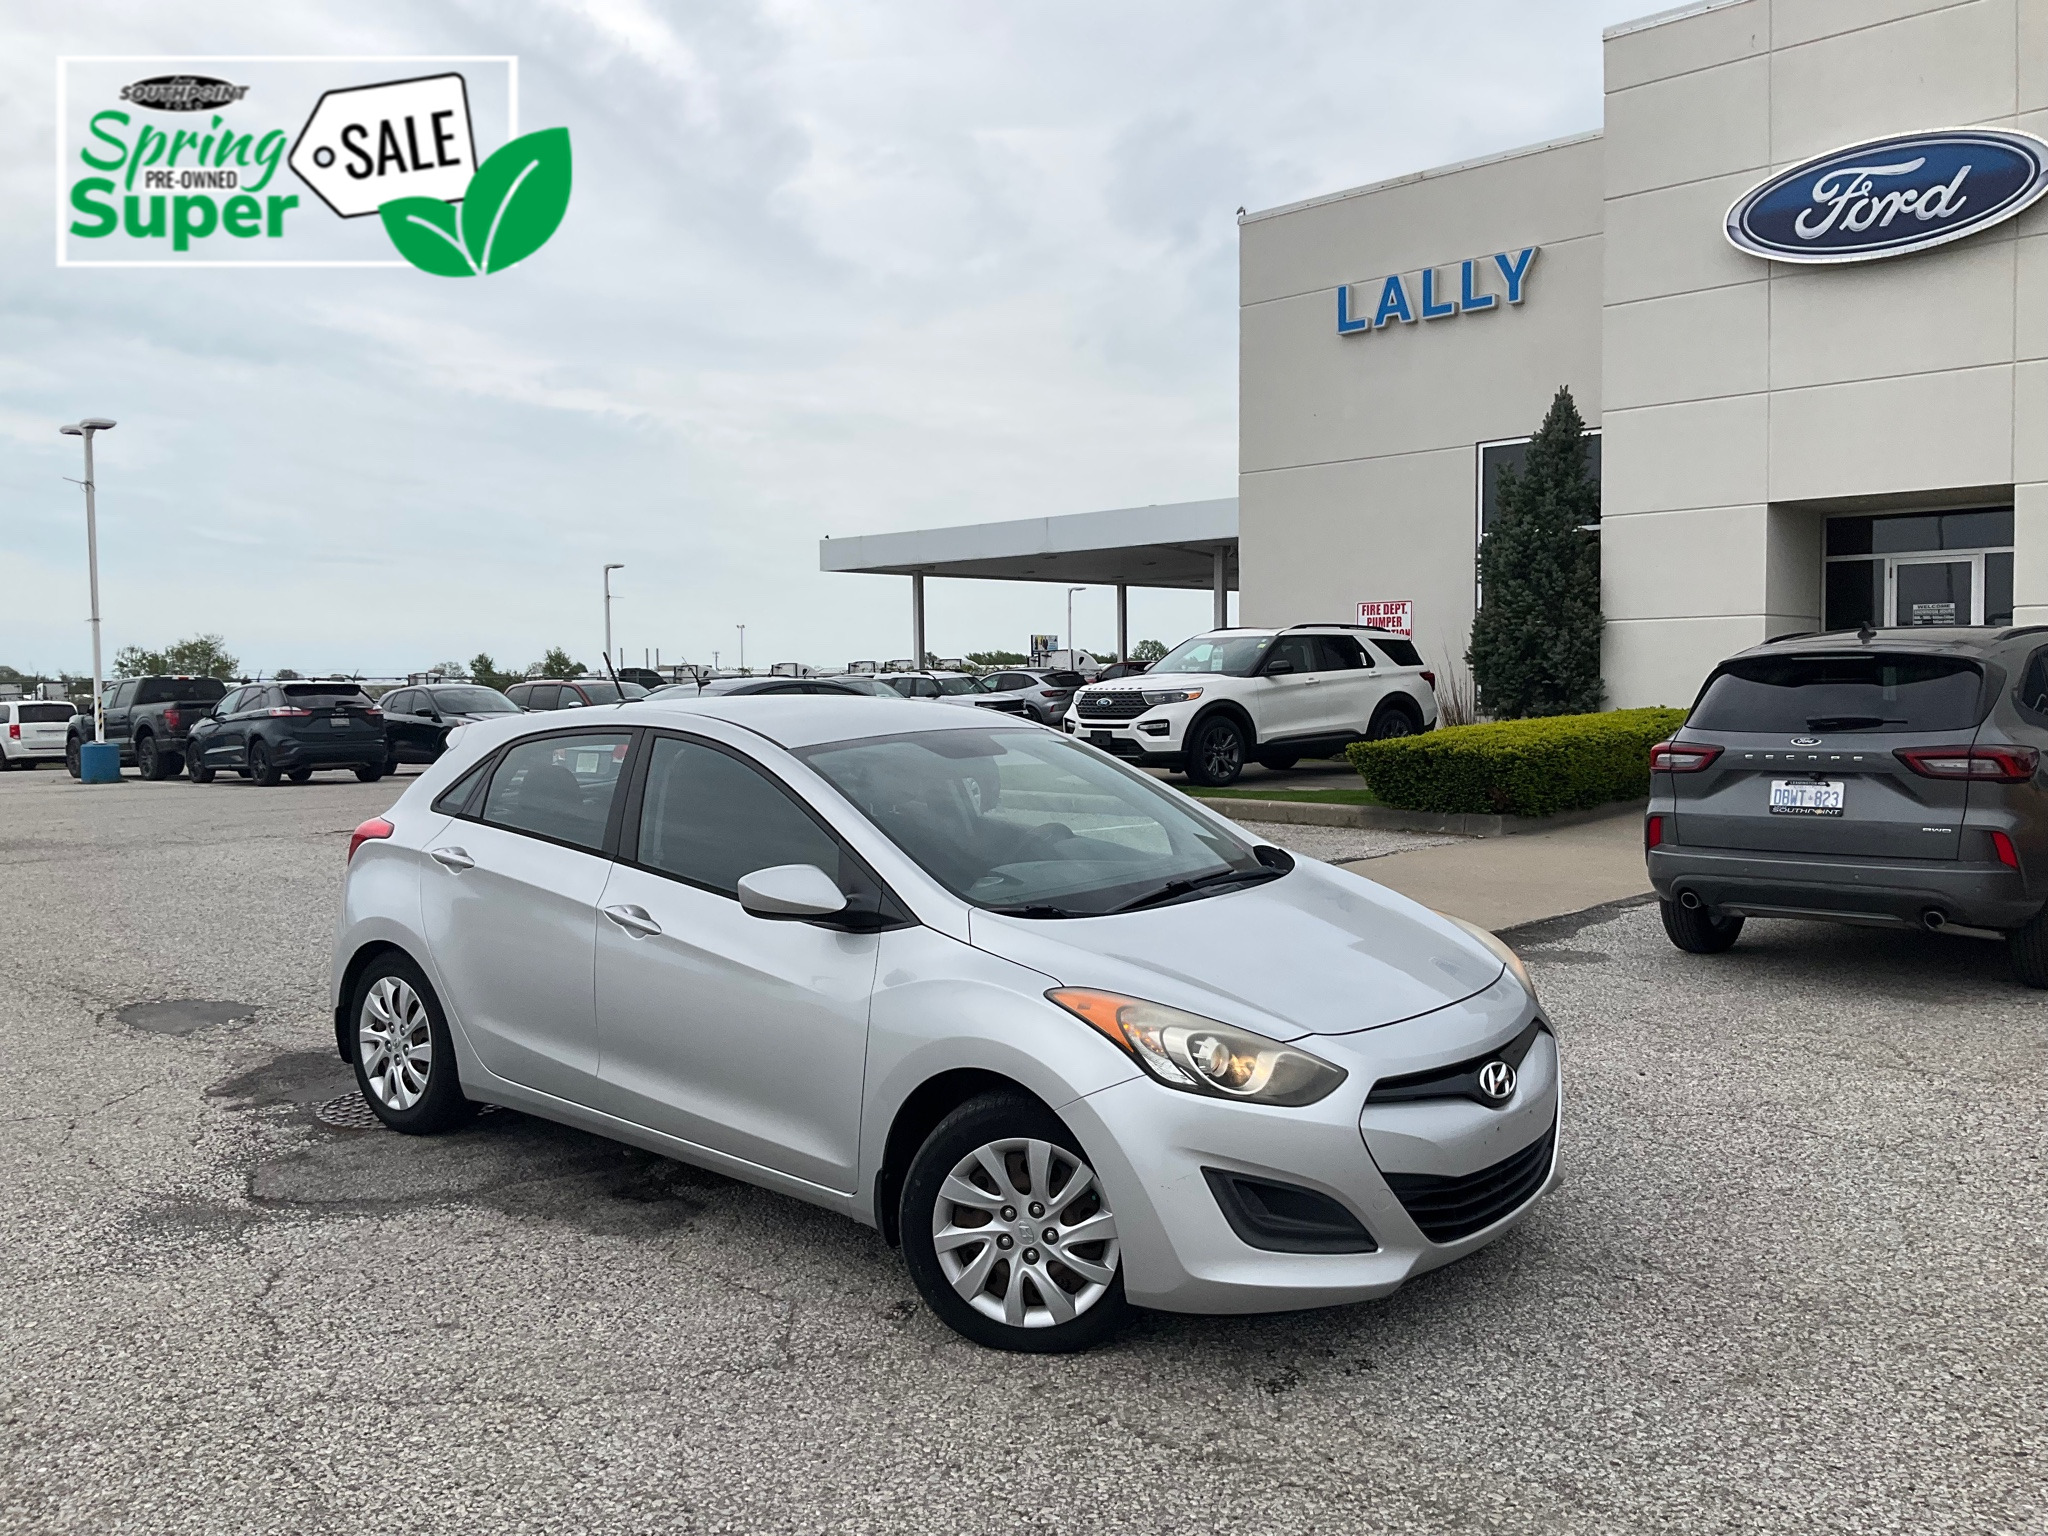 2013 Hyundai Elantra GT ***** THIS UNIT IS SOLD AS IS *****